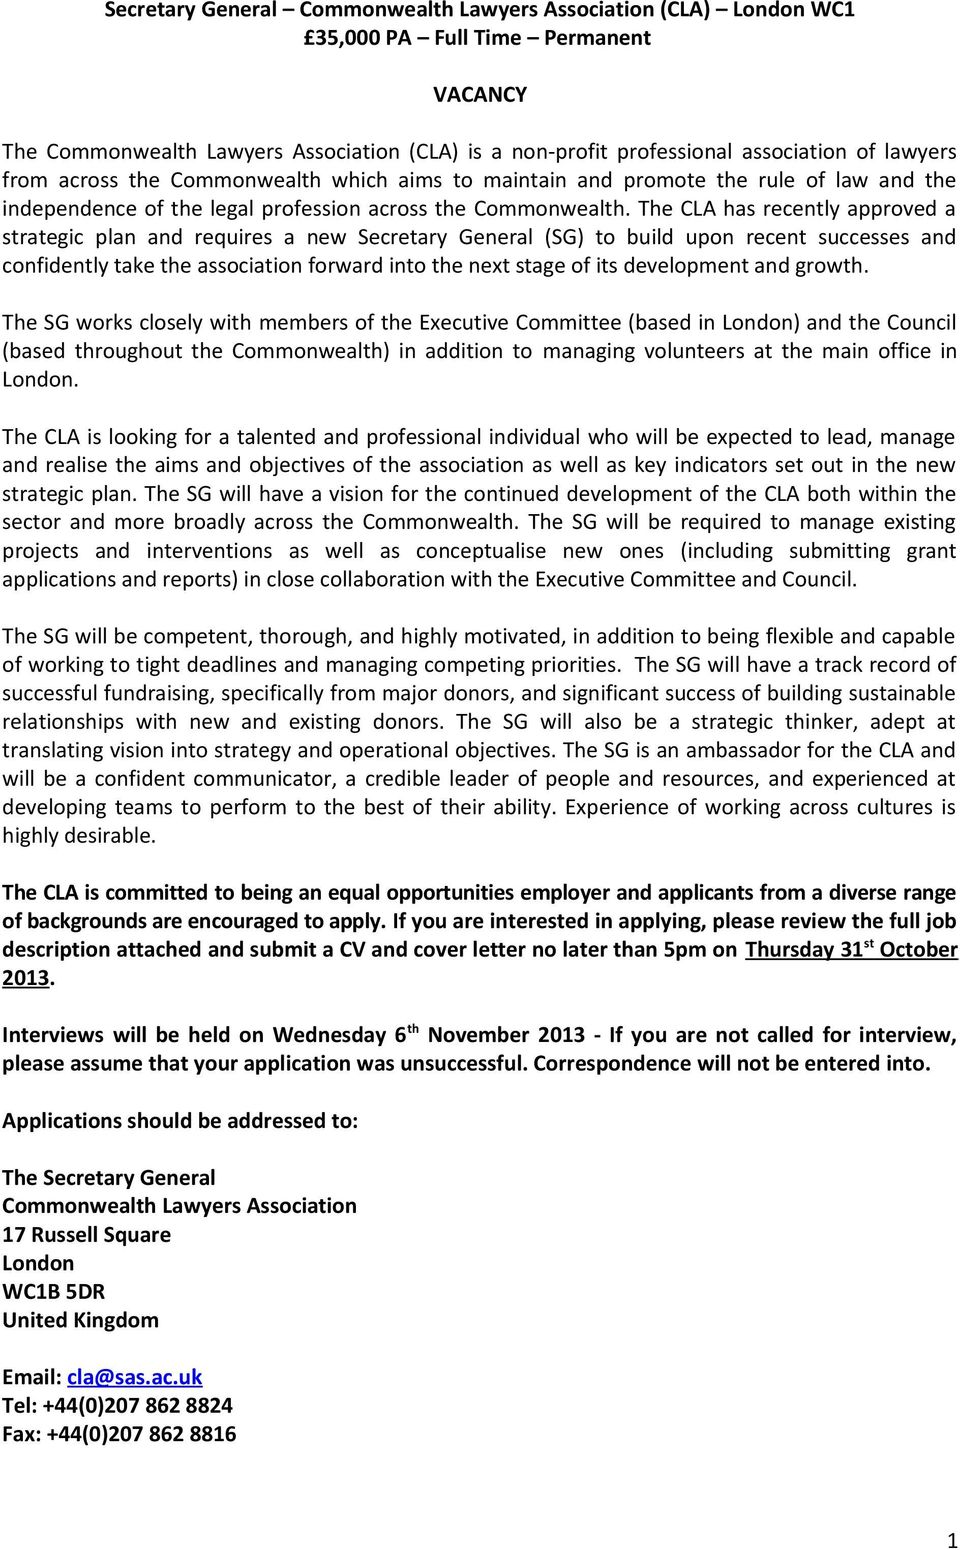 The CLA has recently approved a strategic plan and requires a new Secretary General (SG) to build upon recent successes and confidently take the association forward into the next stage of its